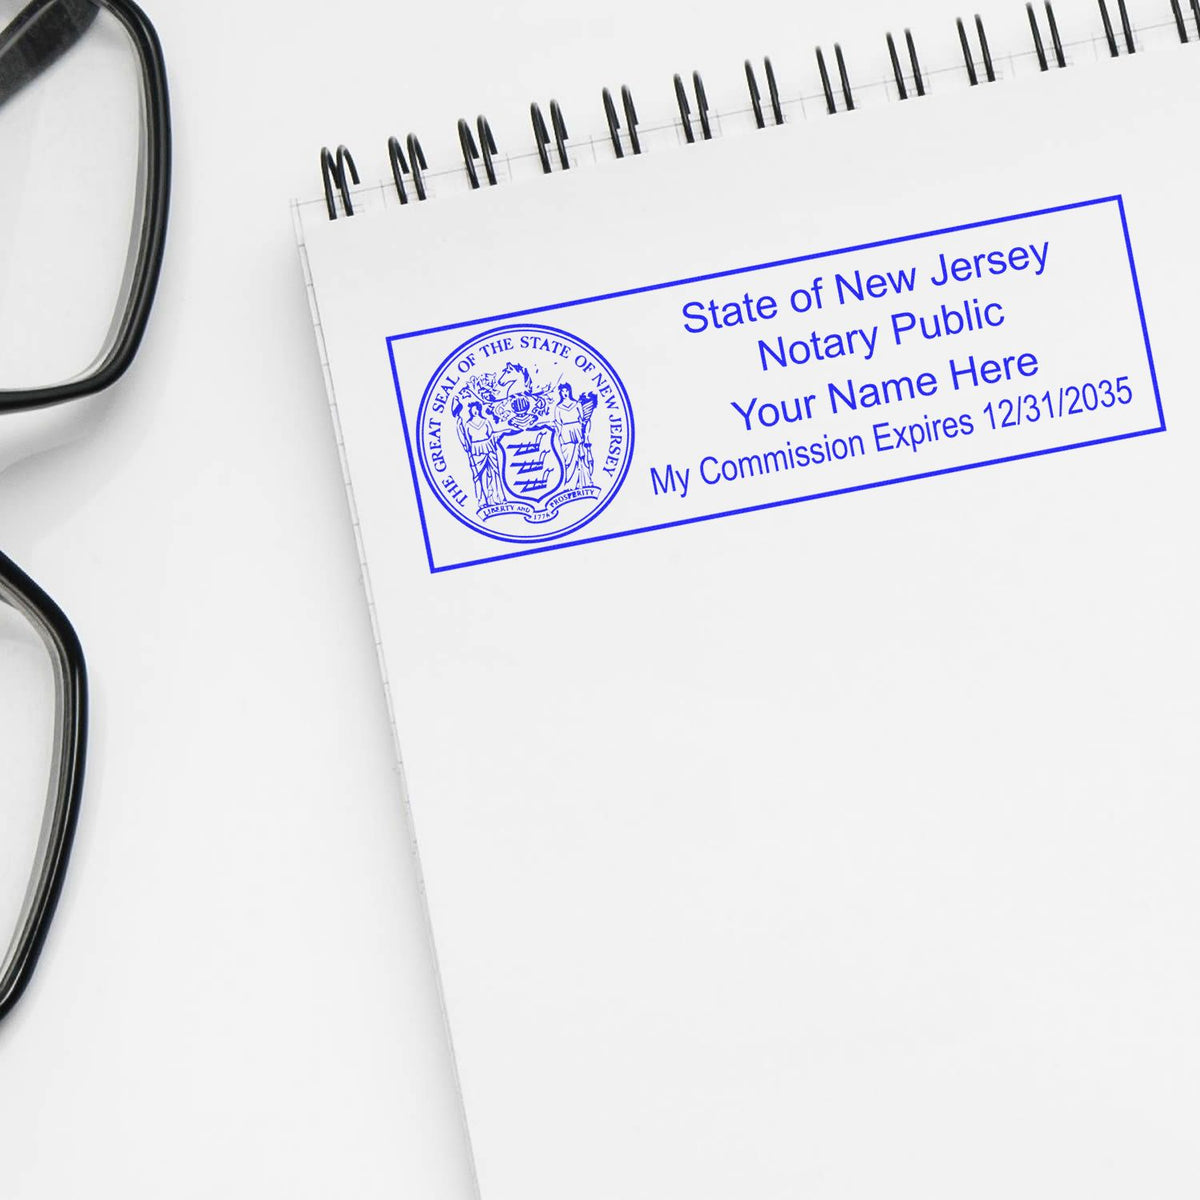 A lifestyle photo showing a stamped image of the Wooden Handle New Jersey State Seal Notary Public Stamp on a piece of paper